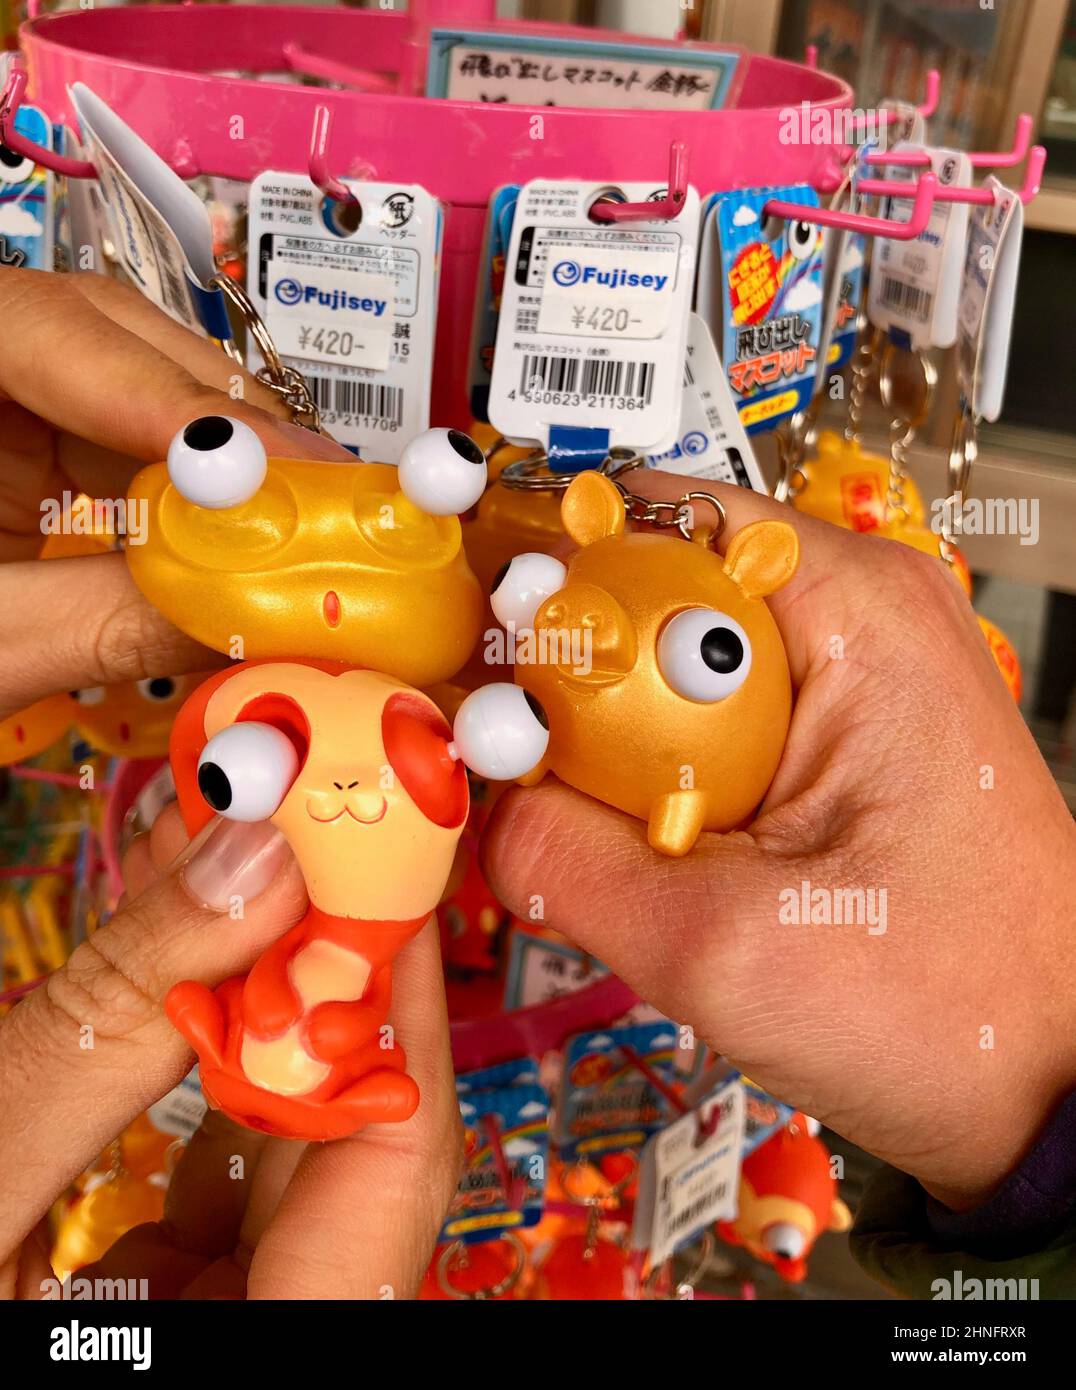 Funny key rings, animal figures with protruding eyes, souvenirs in a shop, Japan Stock Photo